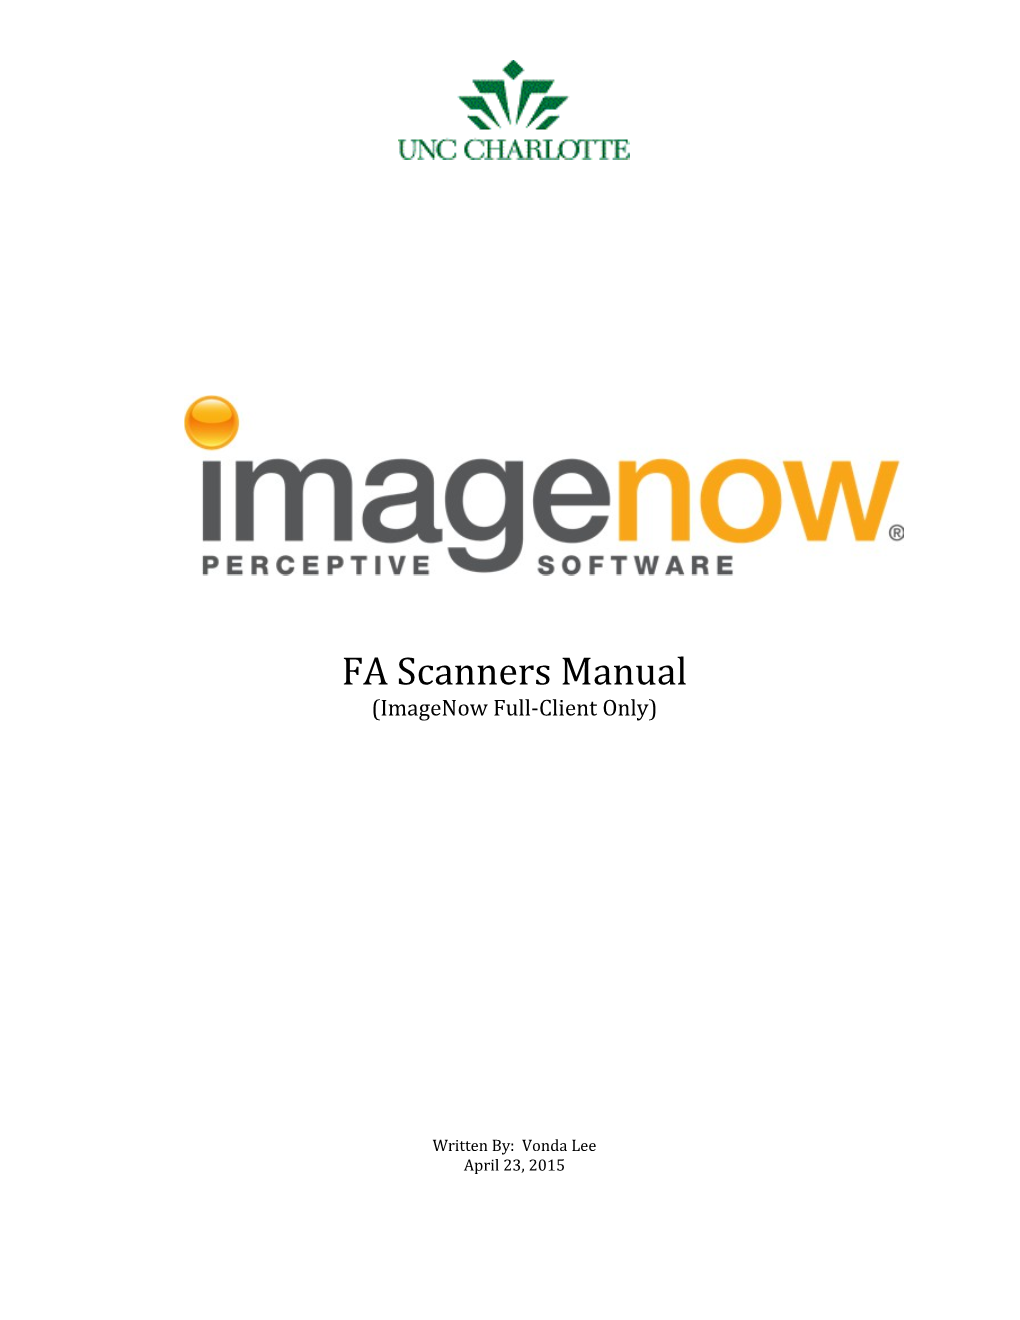 Imagenow Full-Client Only